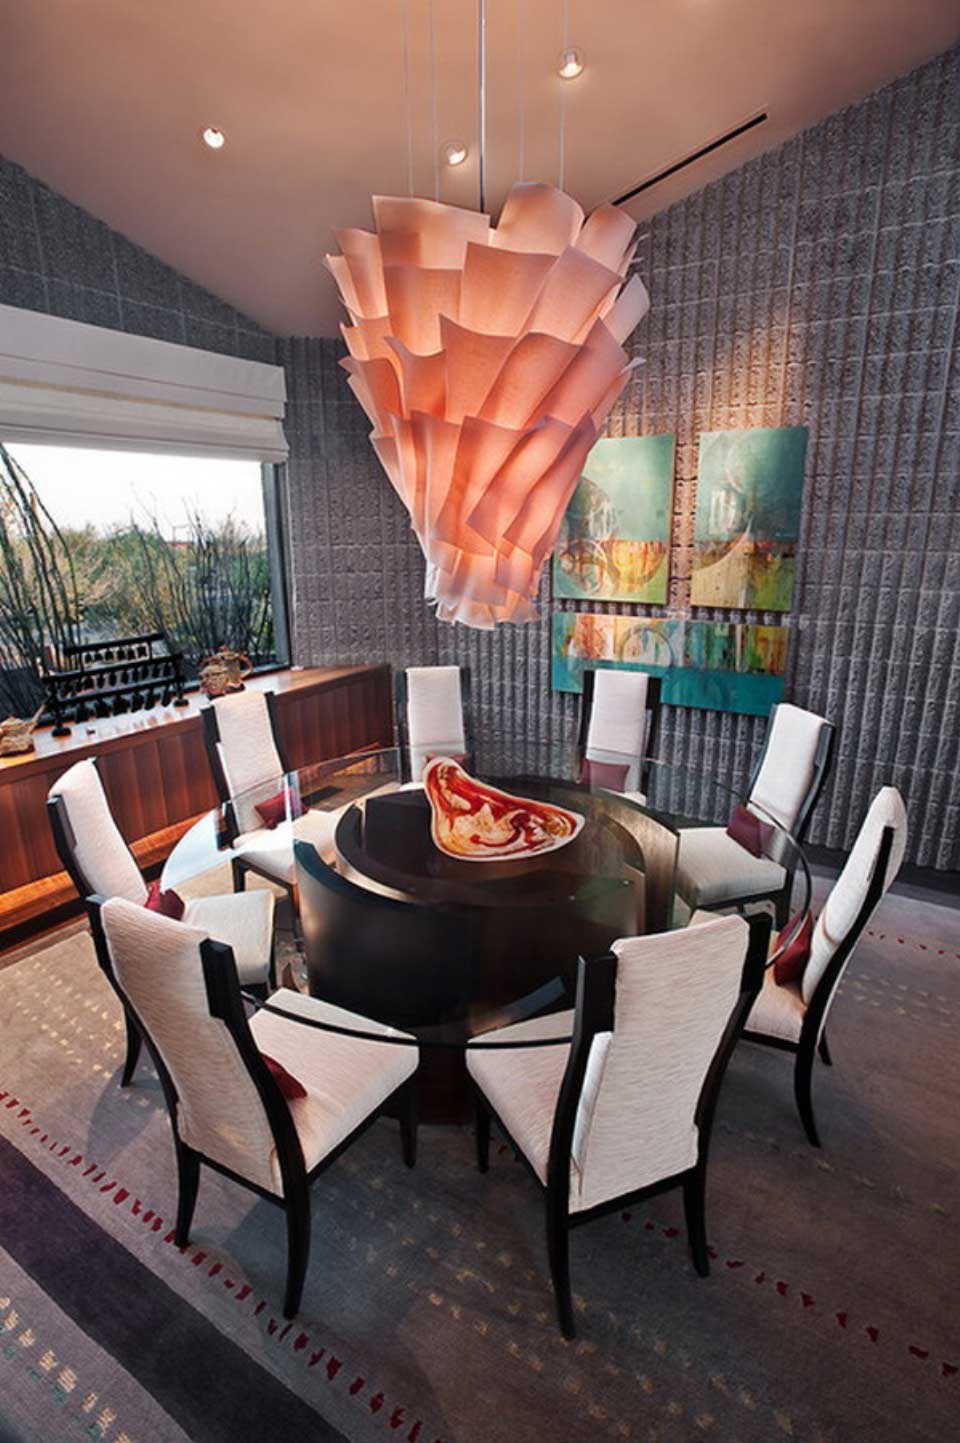 Dining Room Couples Lovely Dining Room Ideas For Couples With Round Glass Dining Table Top 8 Persons Designs And Classy Dark Wood Frame Padded Seat Idea Also Beautiful Orange Flower Pendant Lamp Design Dining Room The Best Simple Dining Room Ideas